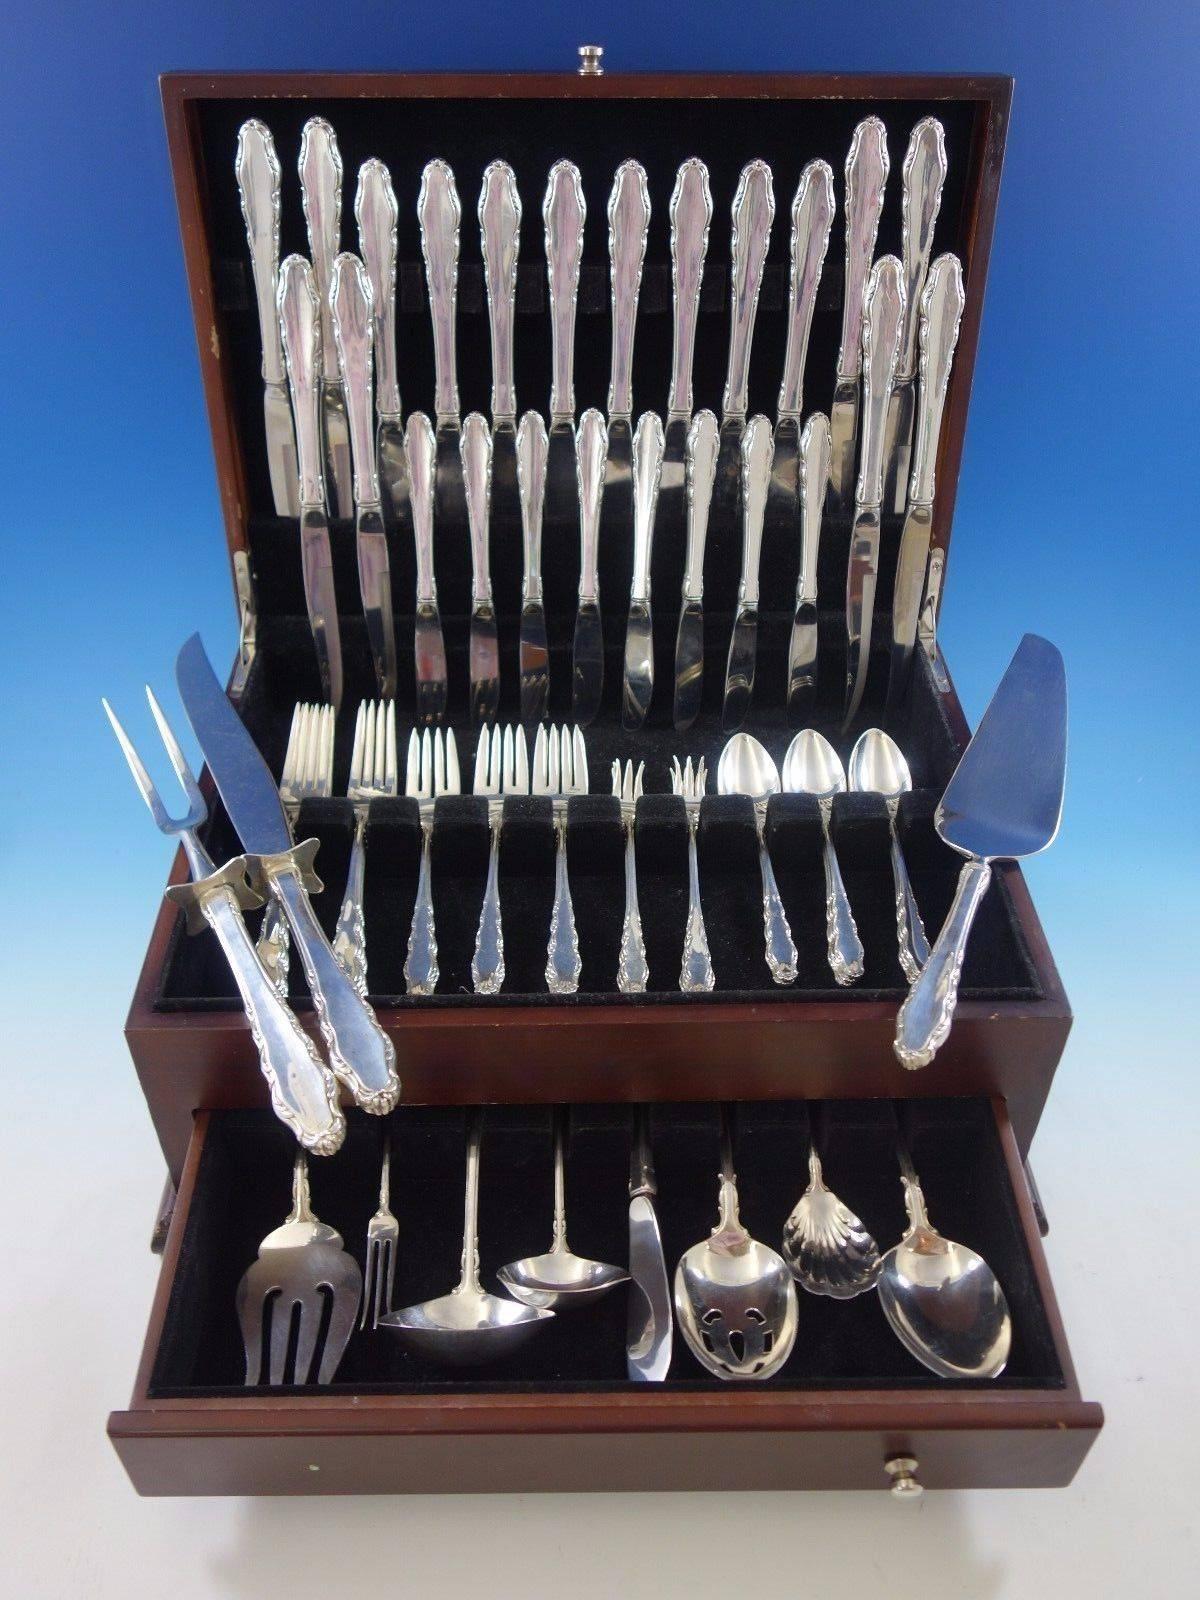 English provincial by Reed & Barton sterling silver flatware set - 67 pieces. This set includes: 

eight knives, 9 1/8